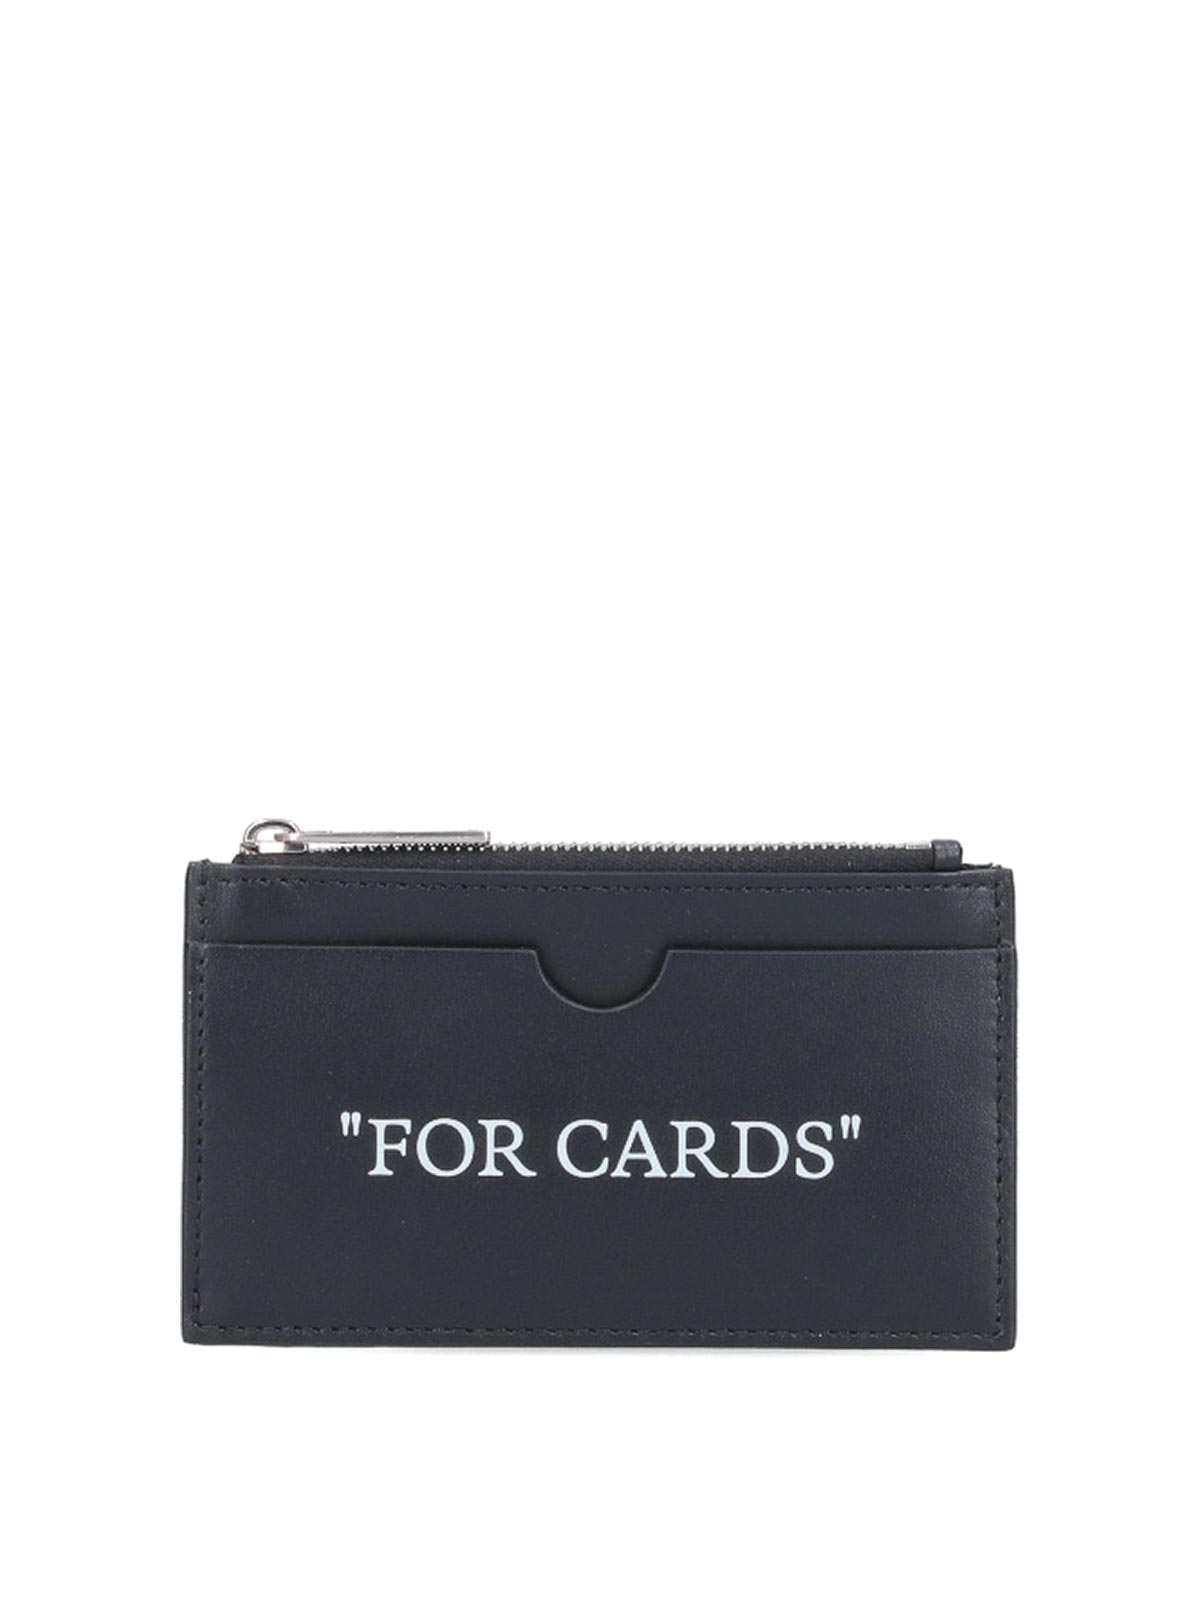 Off-White Wallets & Card Cases for Women